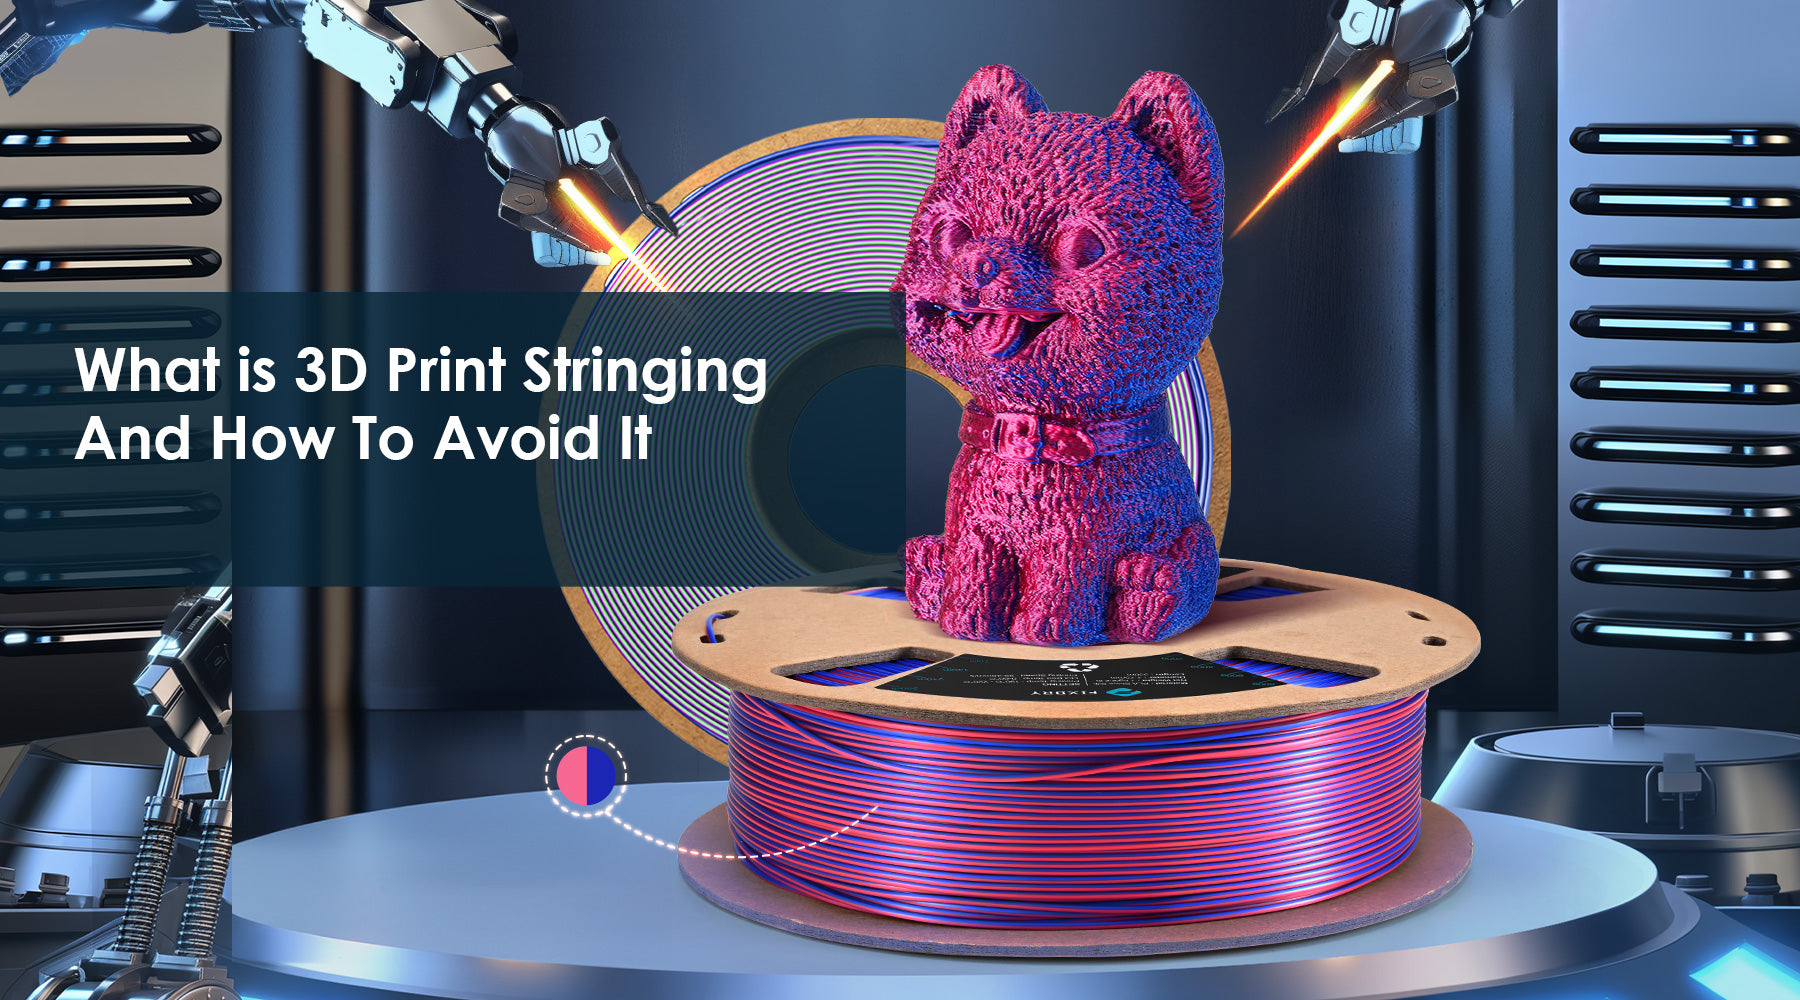 What Is 3D Print Stringing And How To Avoid It